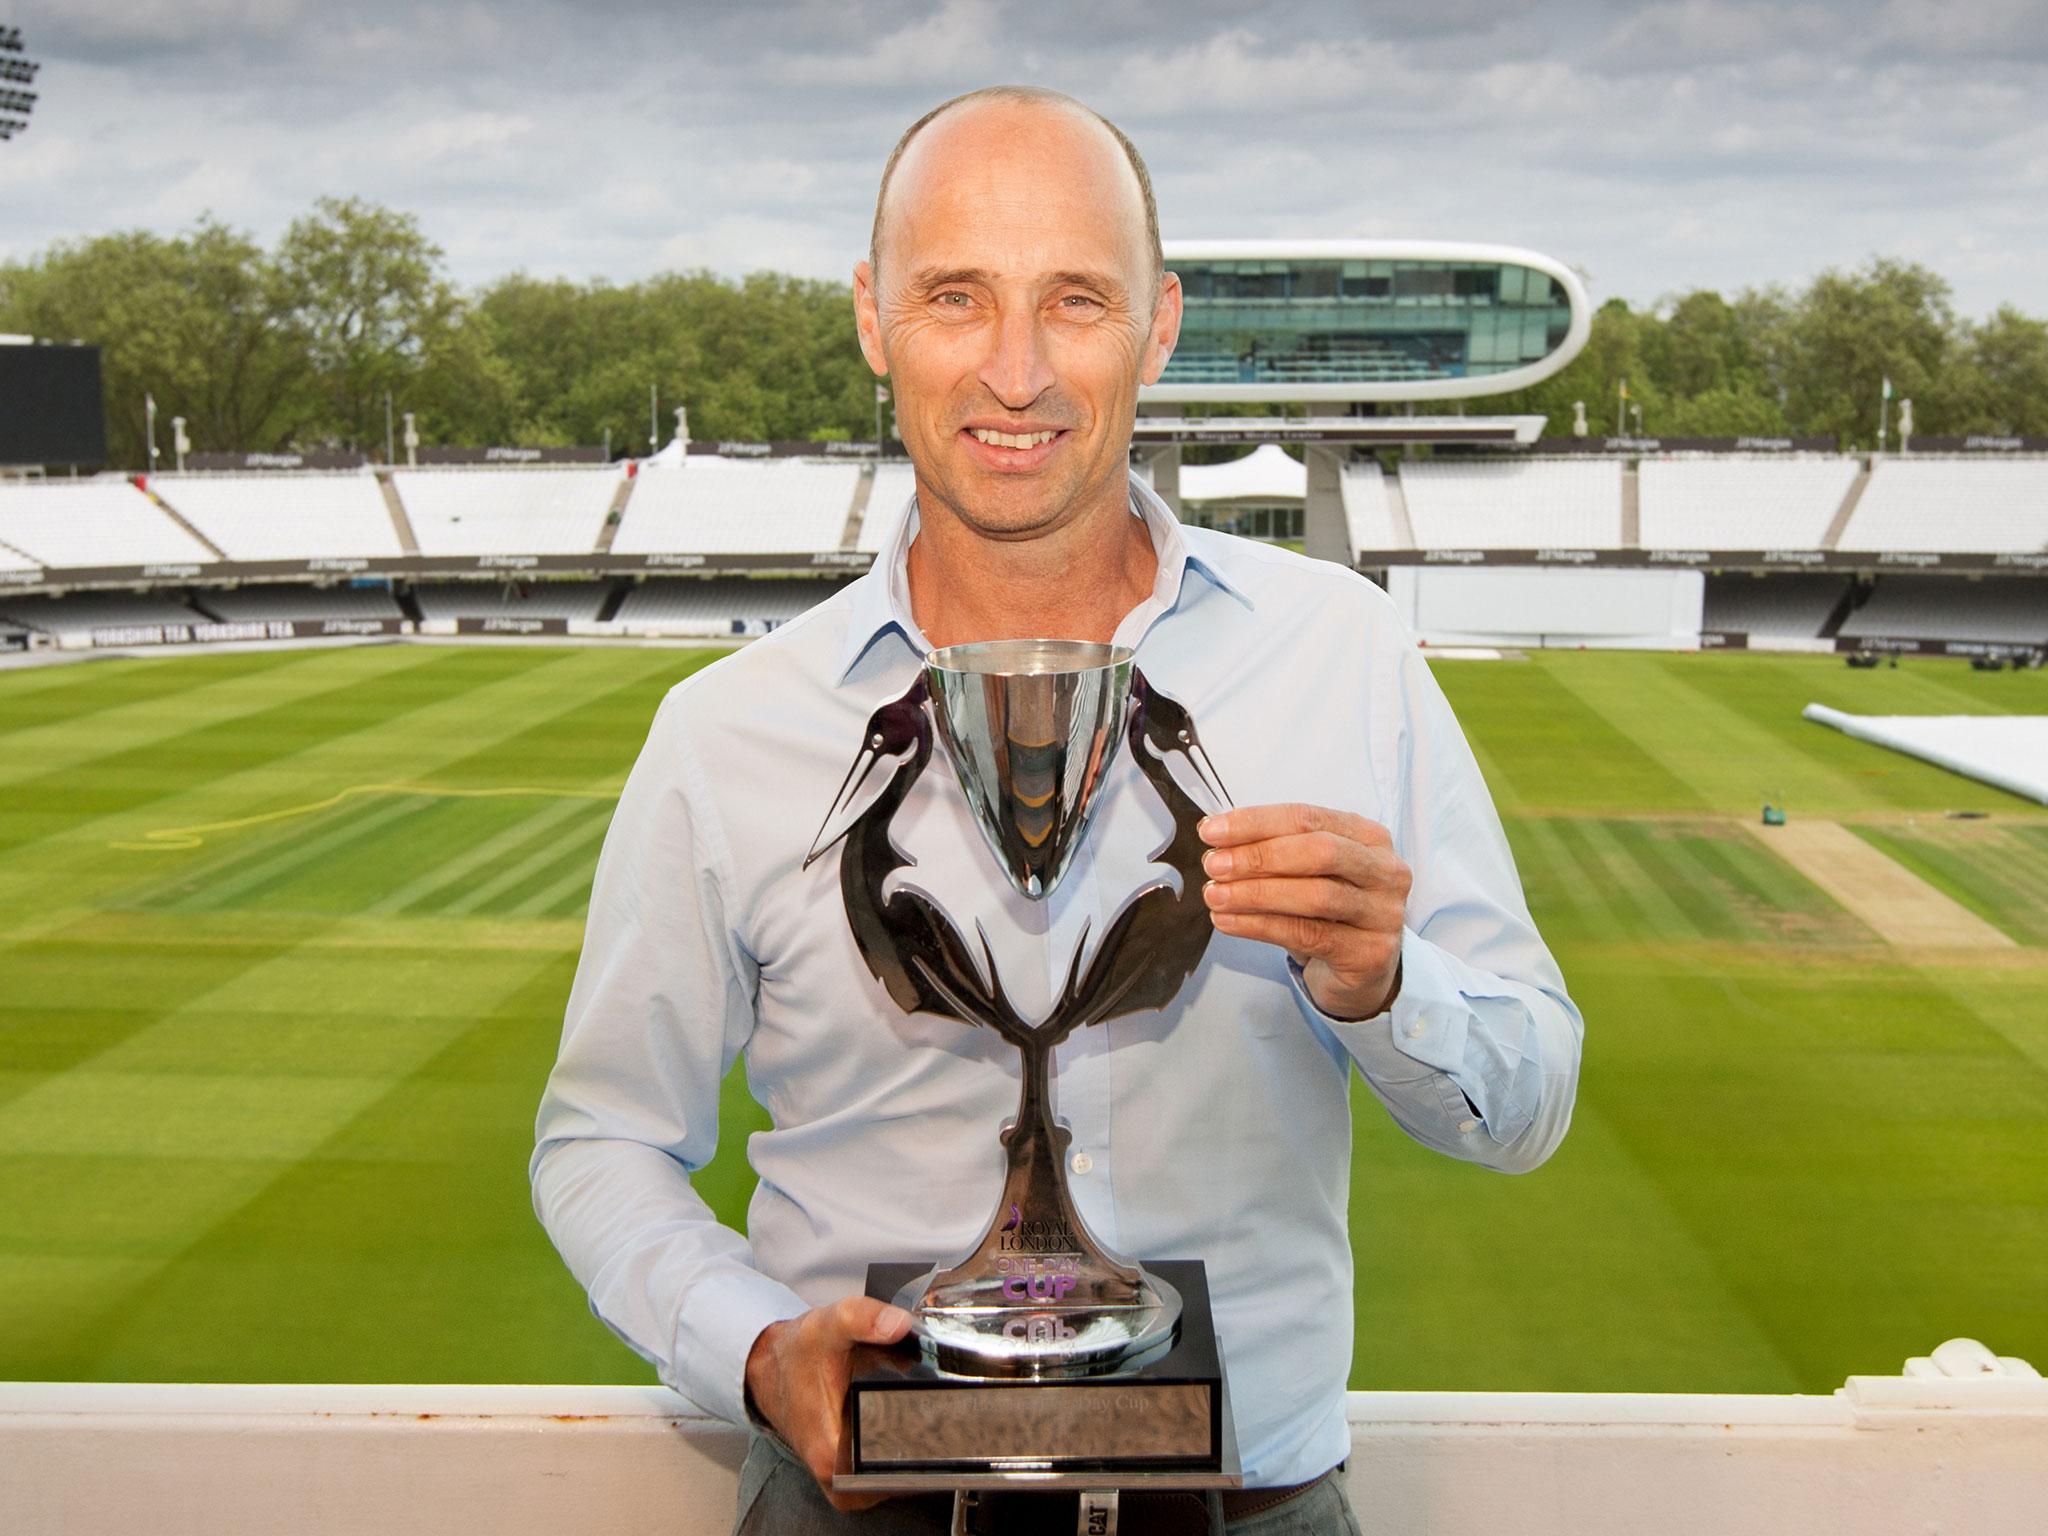 Nasser Hussain with the Royal London One-day trophy at Lord's this week